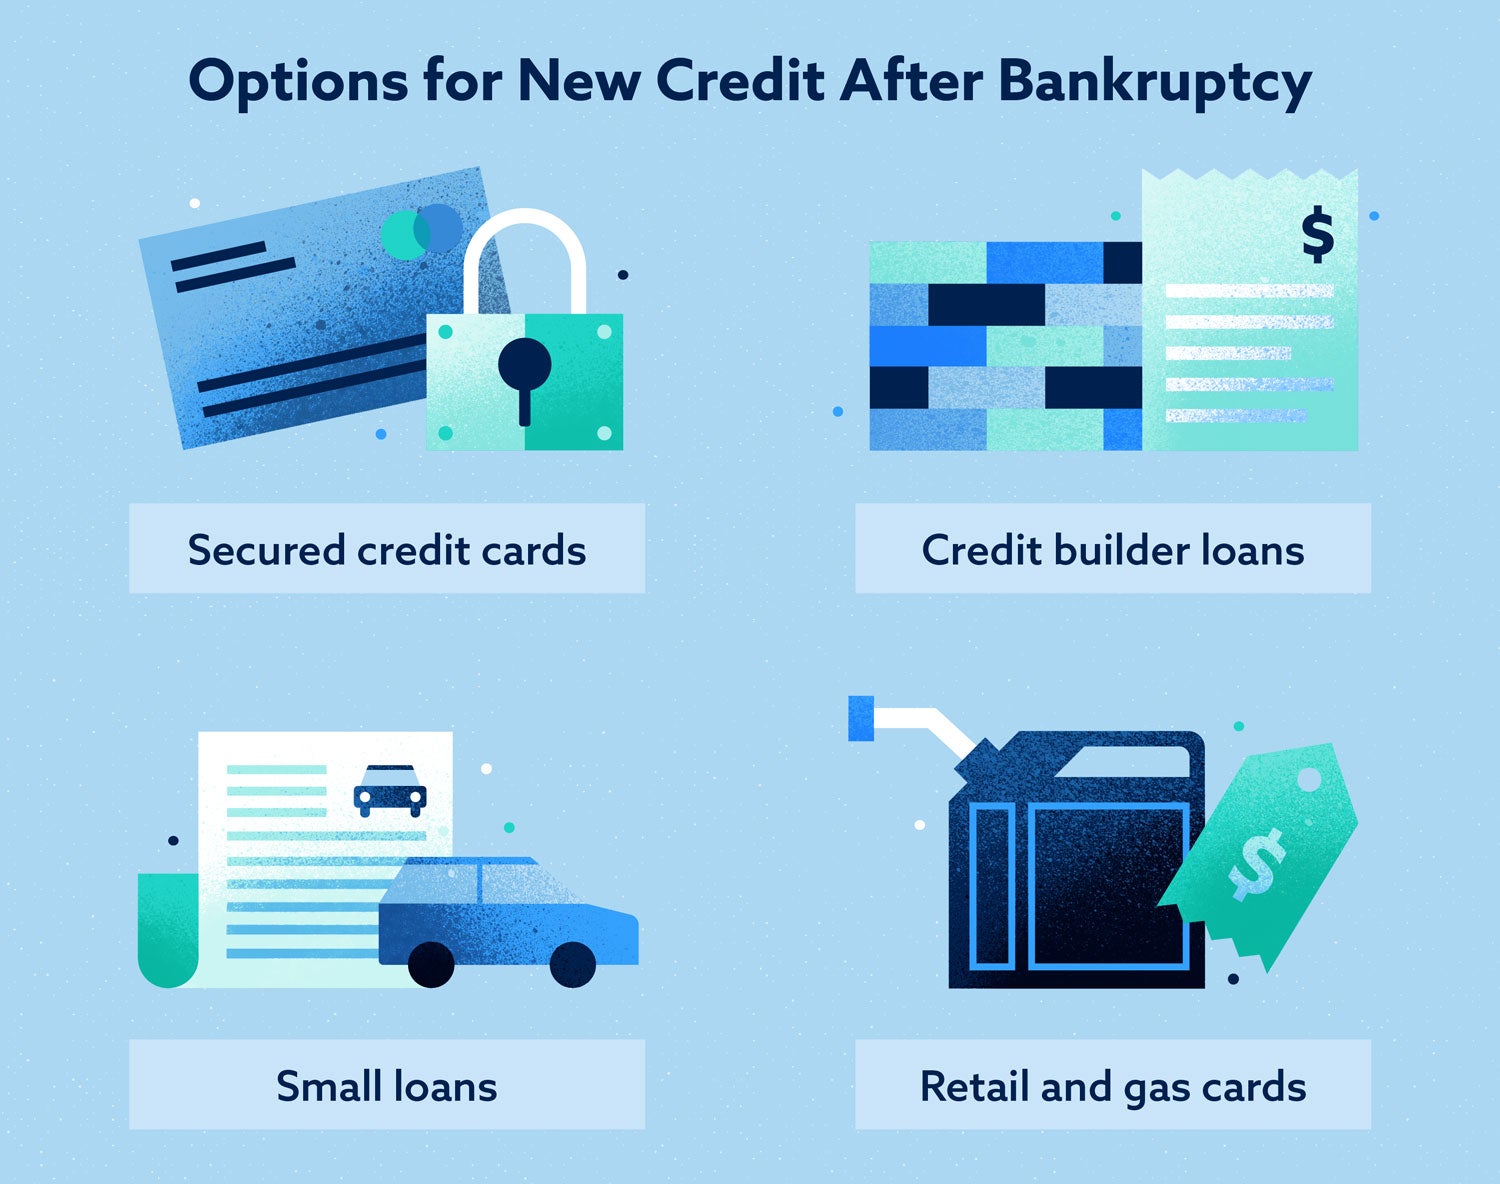 How To Rebuild Credit After Bankruptcy?